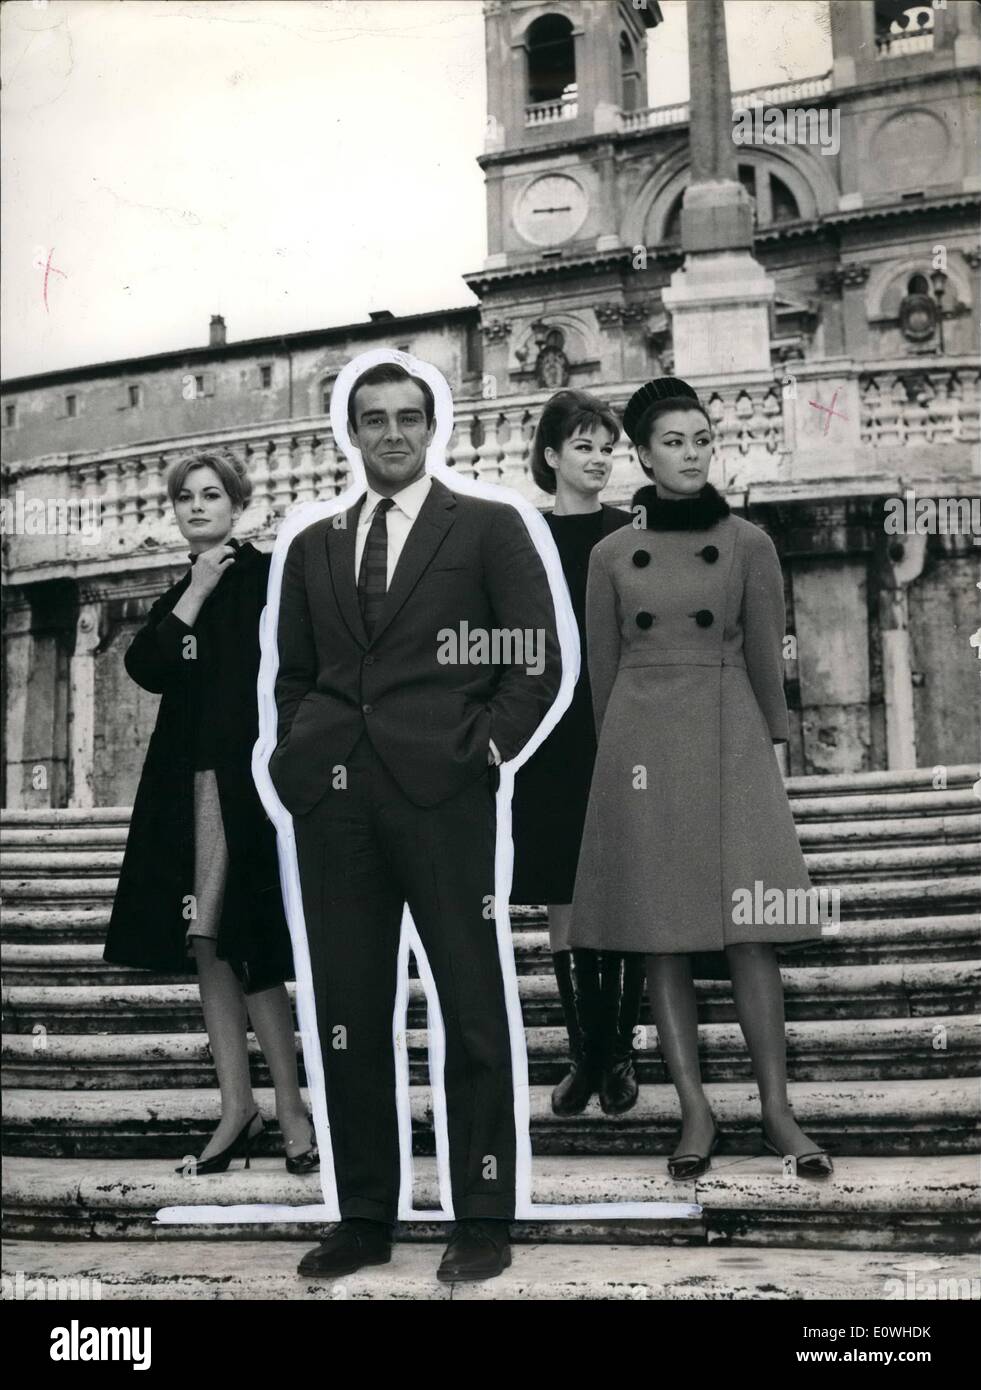 Jan. 01, 1963 - Sean Connery famous British actor arrive in Rome today, accompanied by actresses Gillian Evann, Seyna Seyn and Olivia Hill to continue his Italian pulbicity tour for the launching of his last film ''Agent 007''. Photo shows Sean Connery pictured in Piazza di Spagna with the tree actresses. Stock Photo